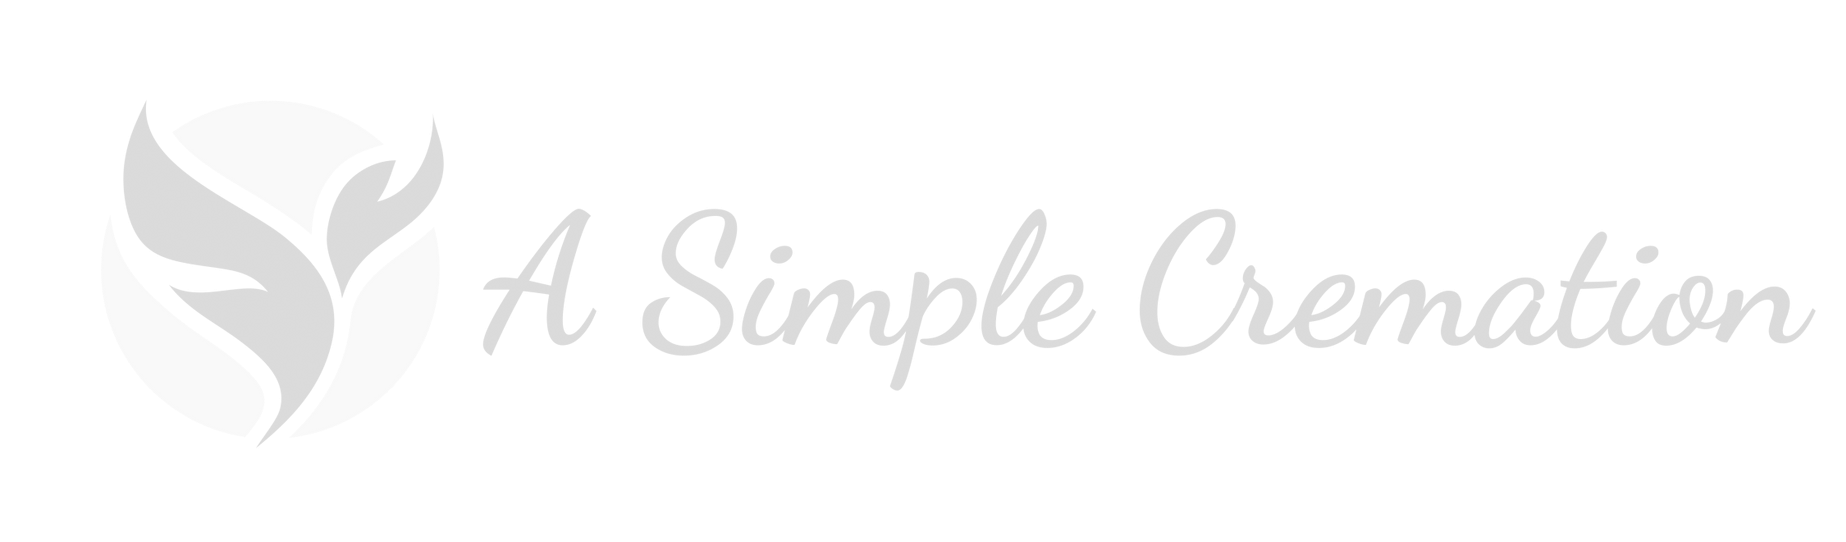 A Simple Cremation Logo